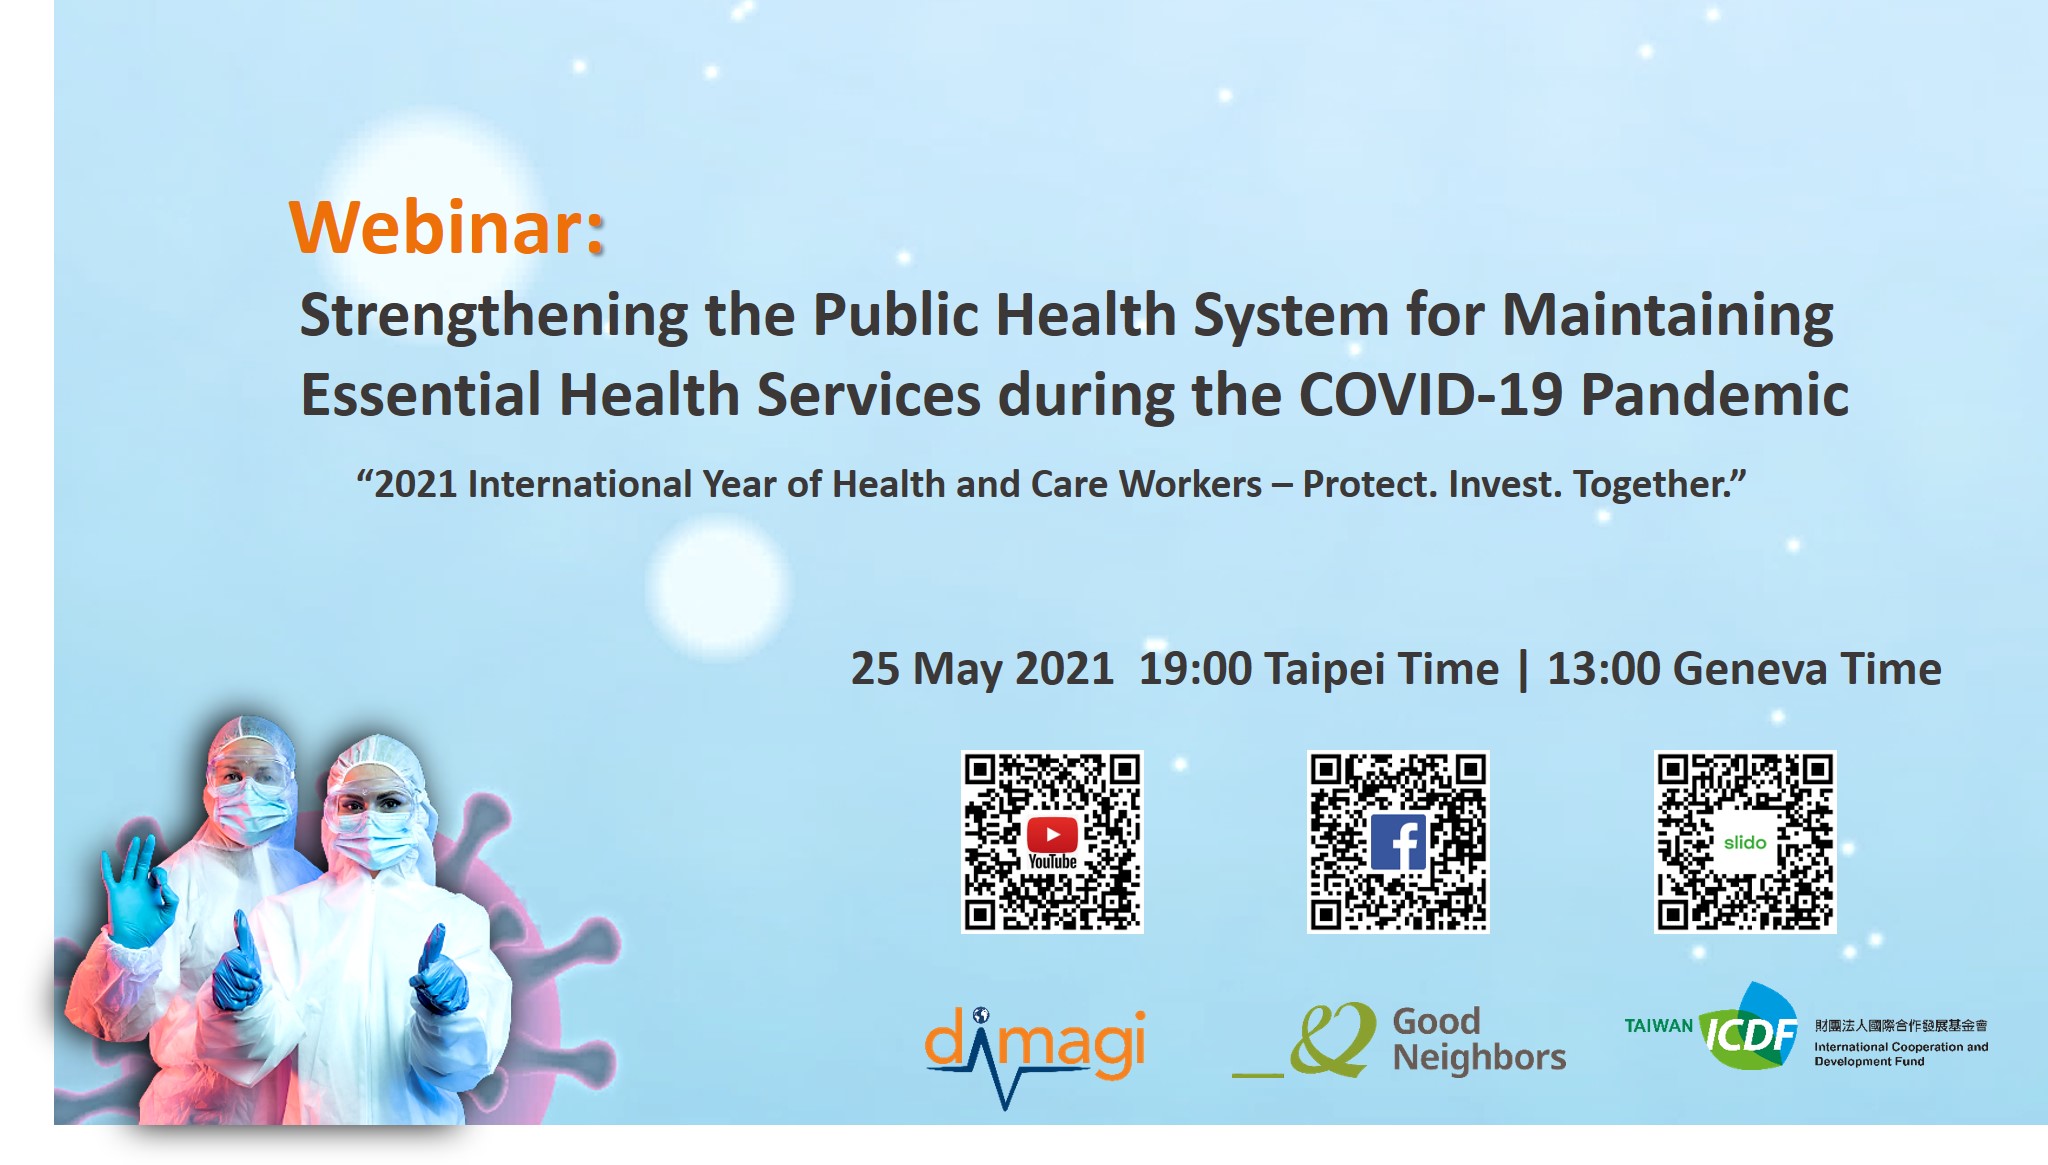 TaiwanICDF is collaborating with Korea-based Good Neighbors and US-based Dimagi Inc. to co-host the Webinar on Strengthening the Public Health System for Maintaining Essential Health Services during the COVID-19 Pandemic